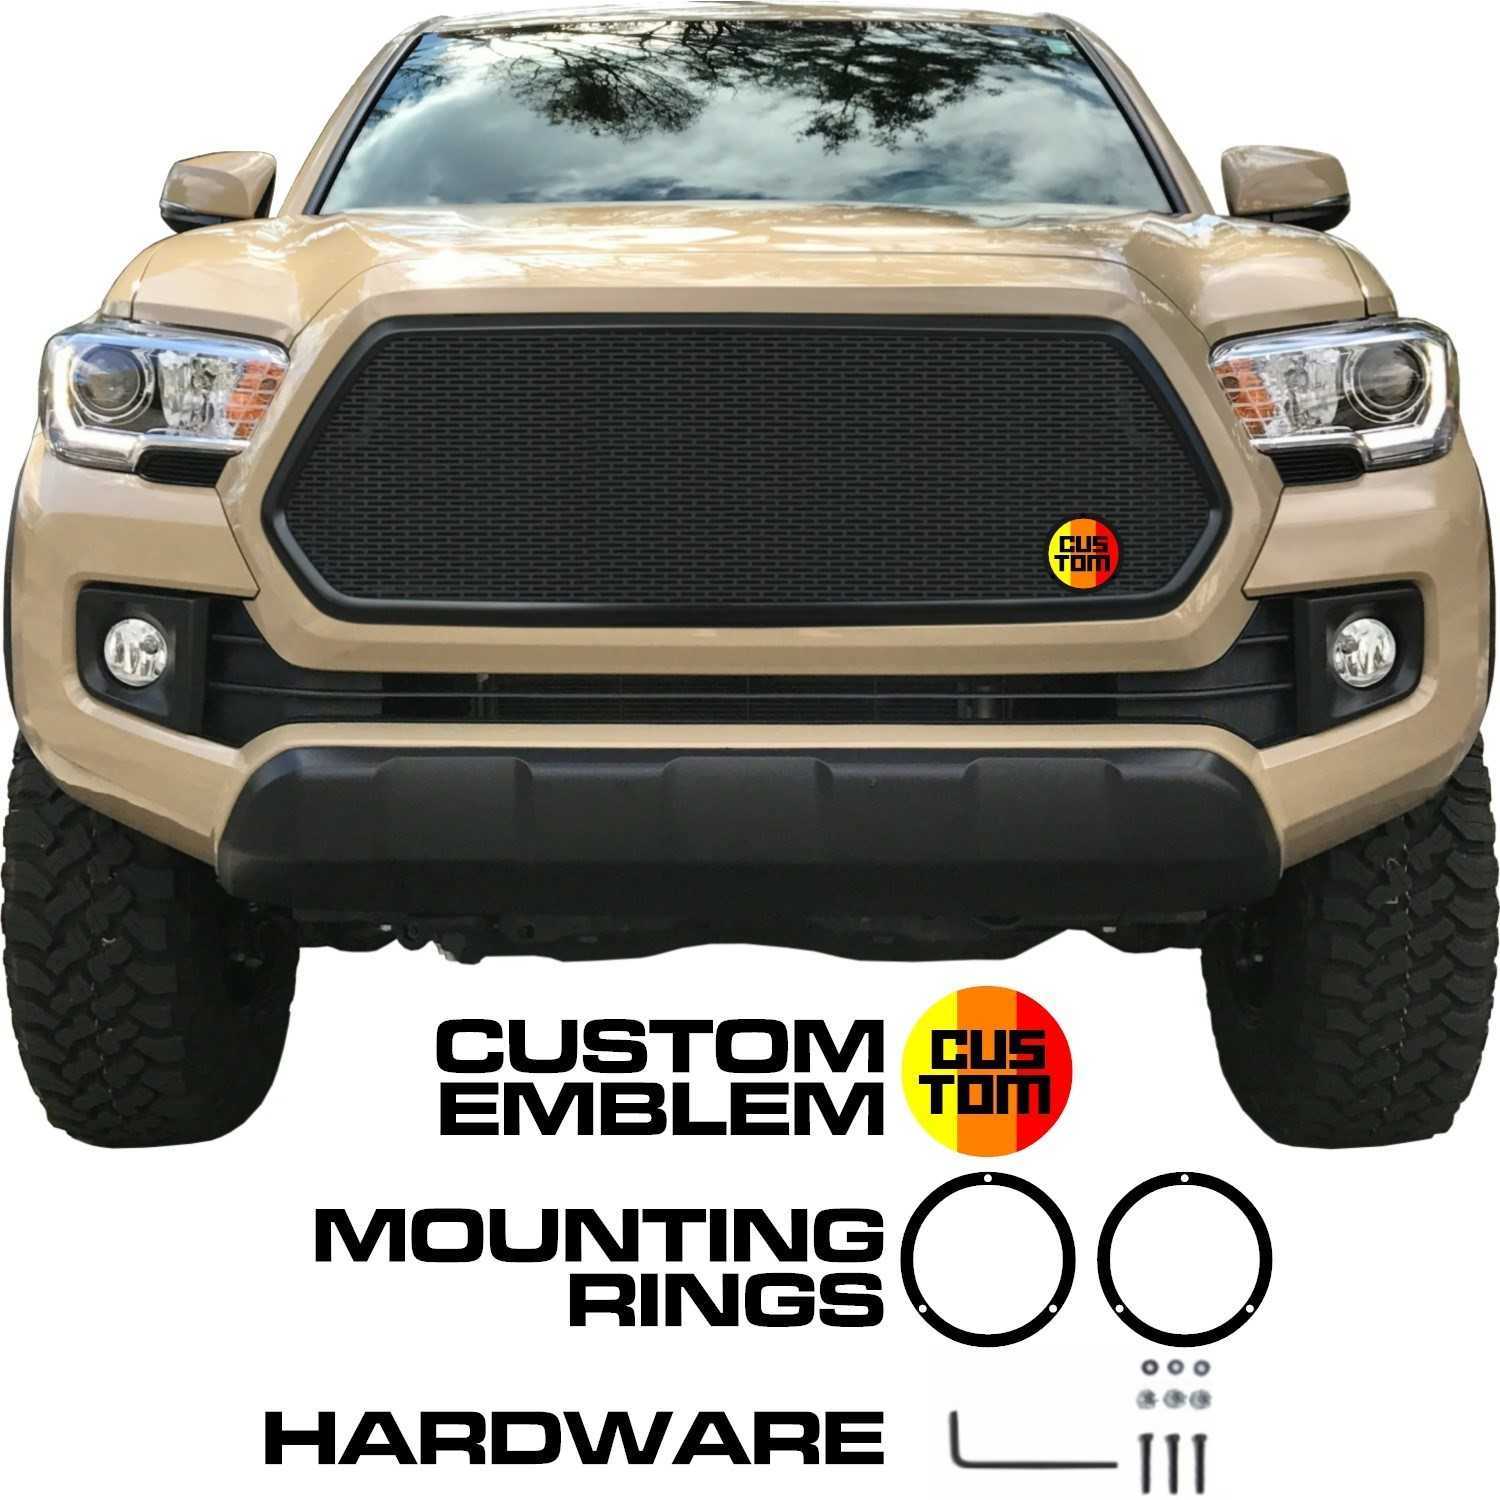 Introducing Full-Color Custom Emblems: The Newest Must-Have for Personalized Grilles!